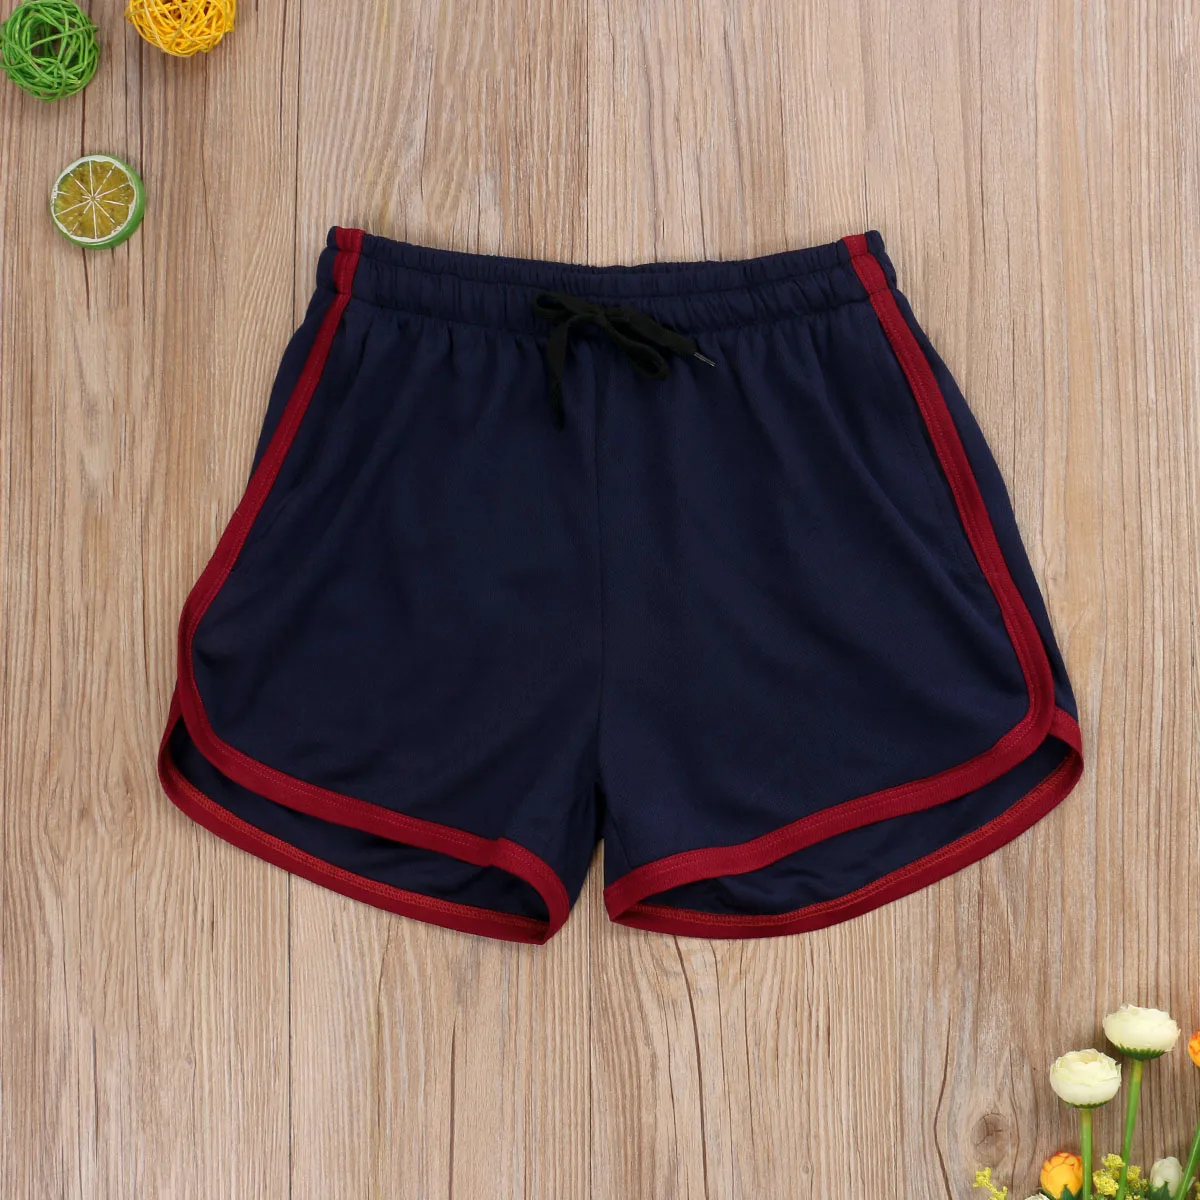 9 Colors Summer Newest Arrival Men Casual Shorts Breathable Sportwear Fitness Pants Trousers Beach Outfits